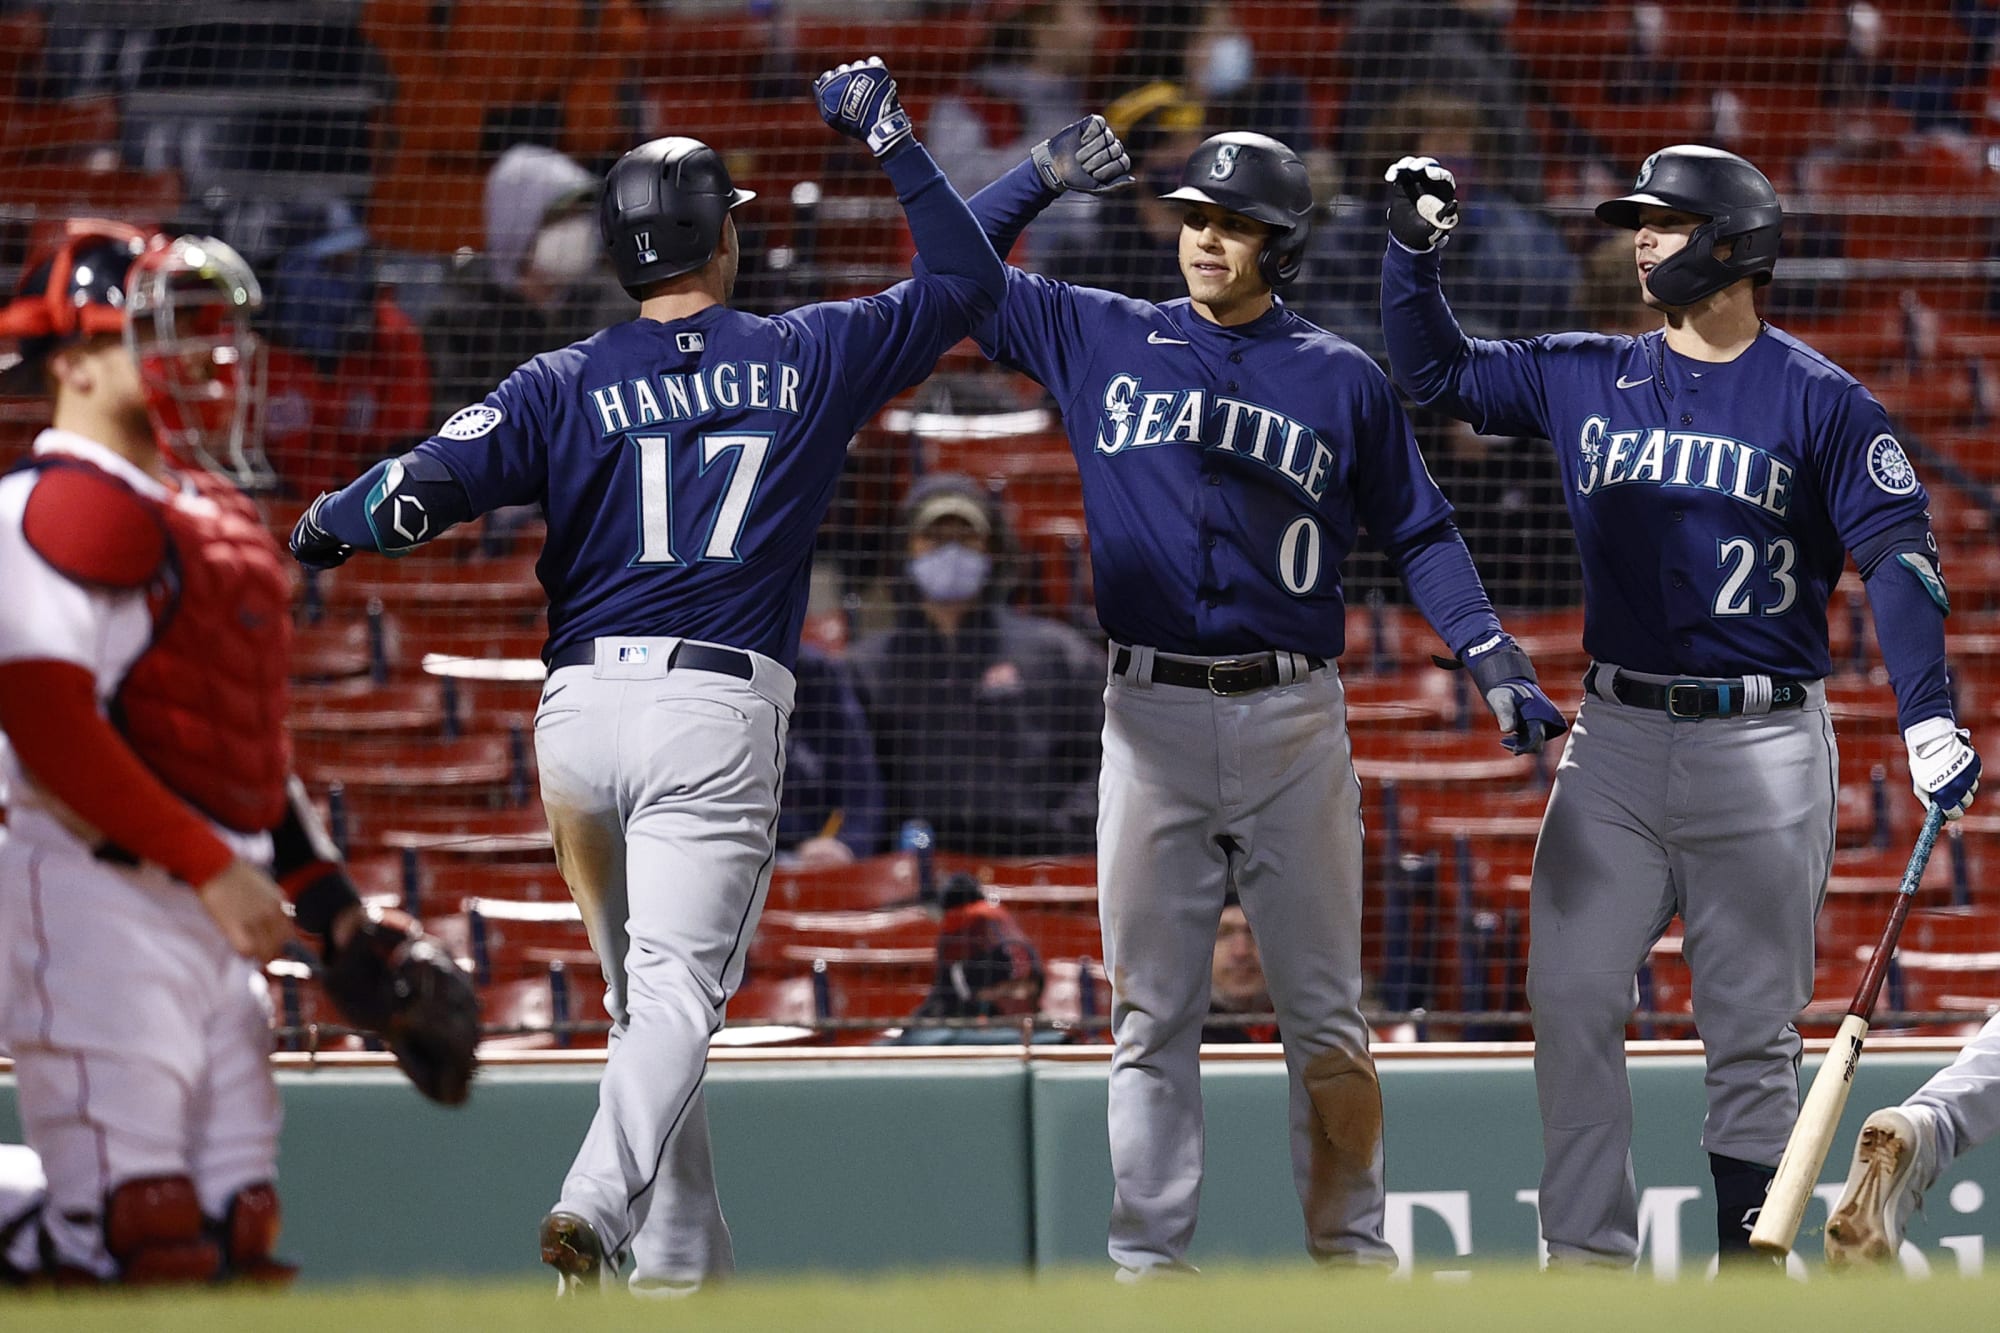 Mariners vs. Red Sox Chaos ball wins again in the series opener